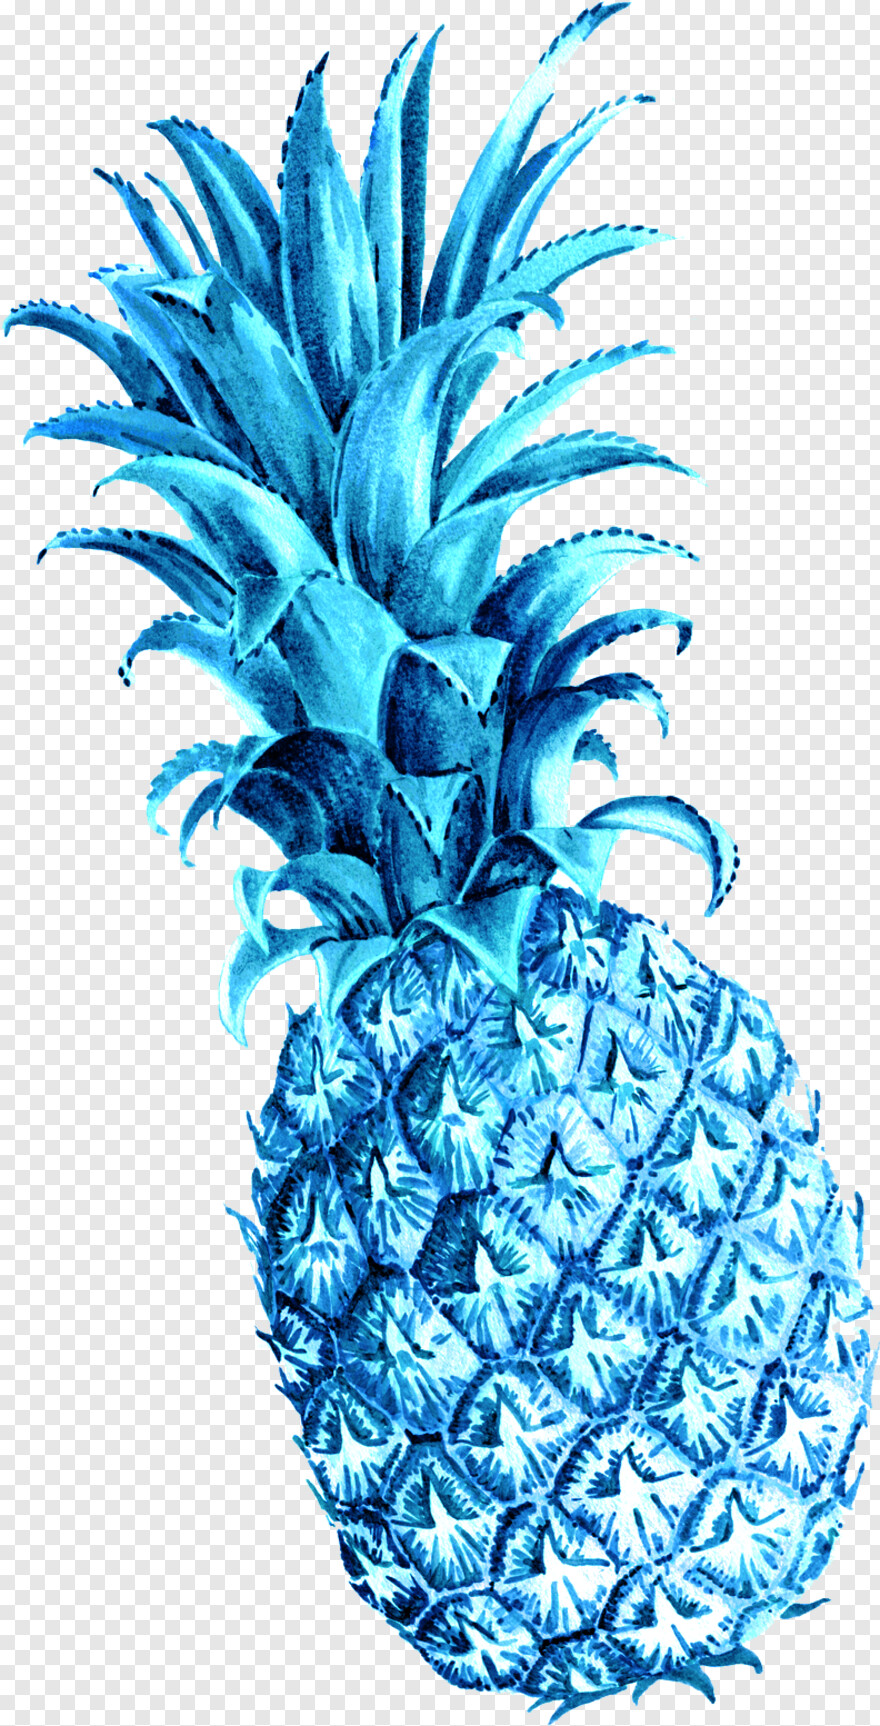 pineapple-clipart # 654170